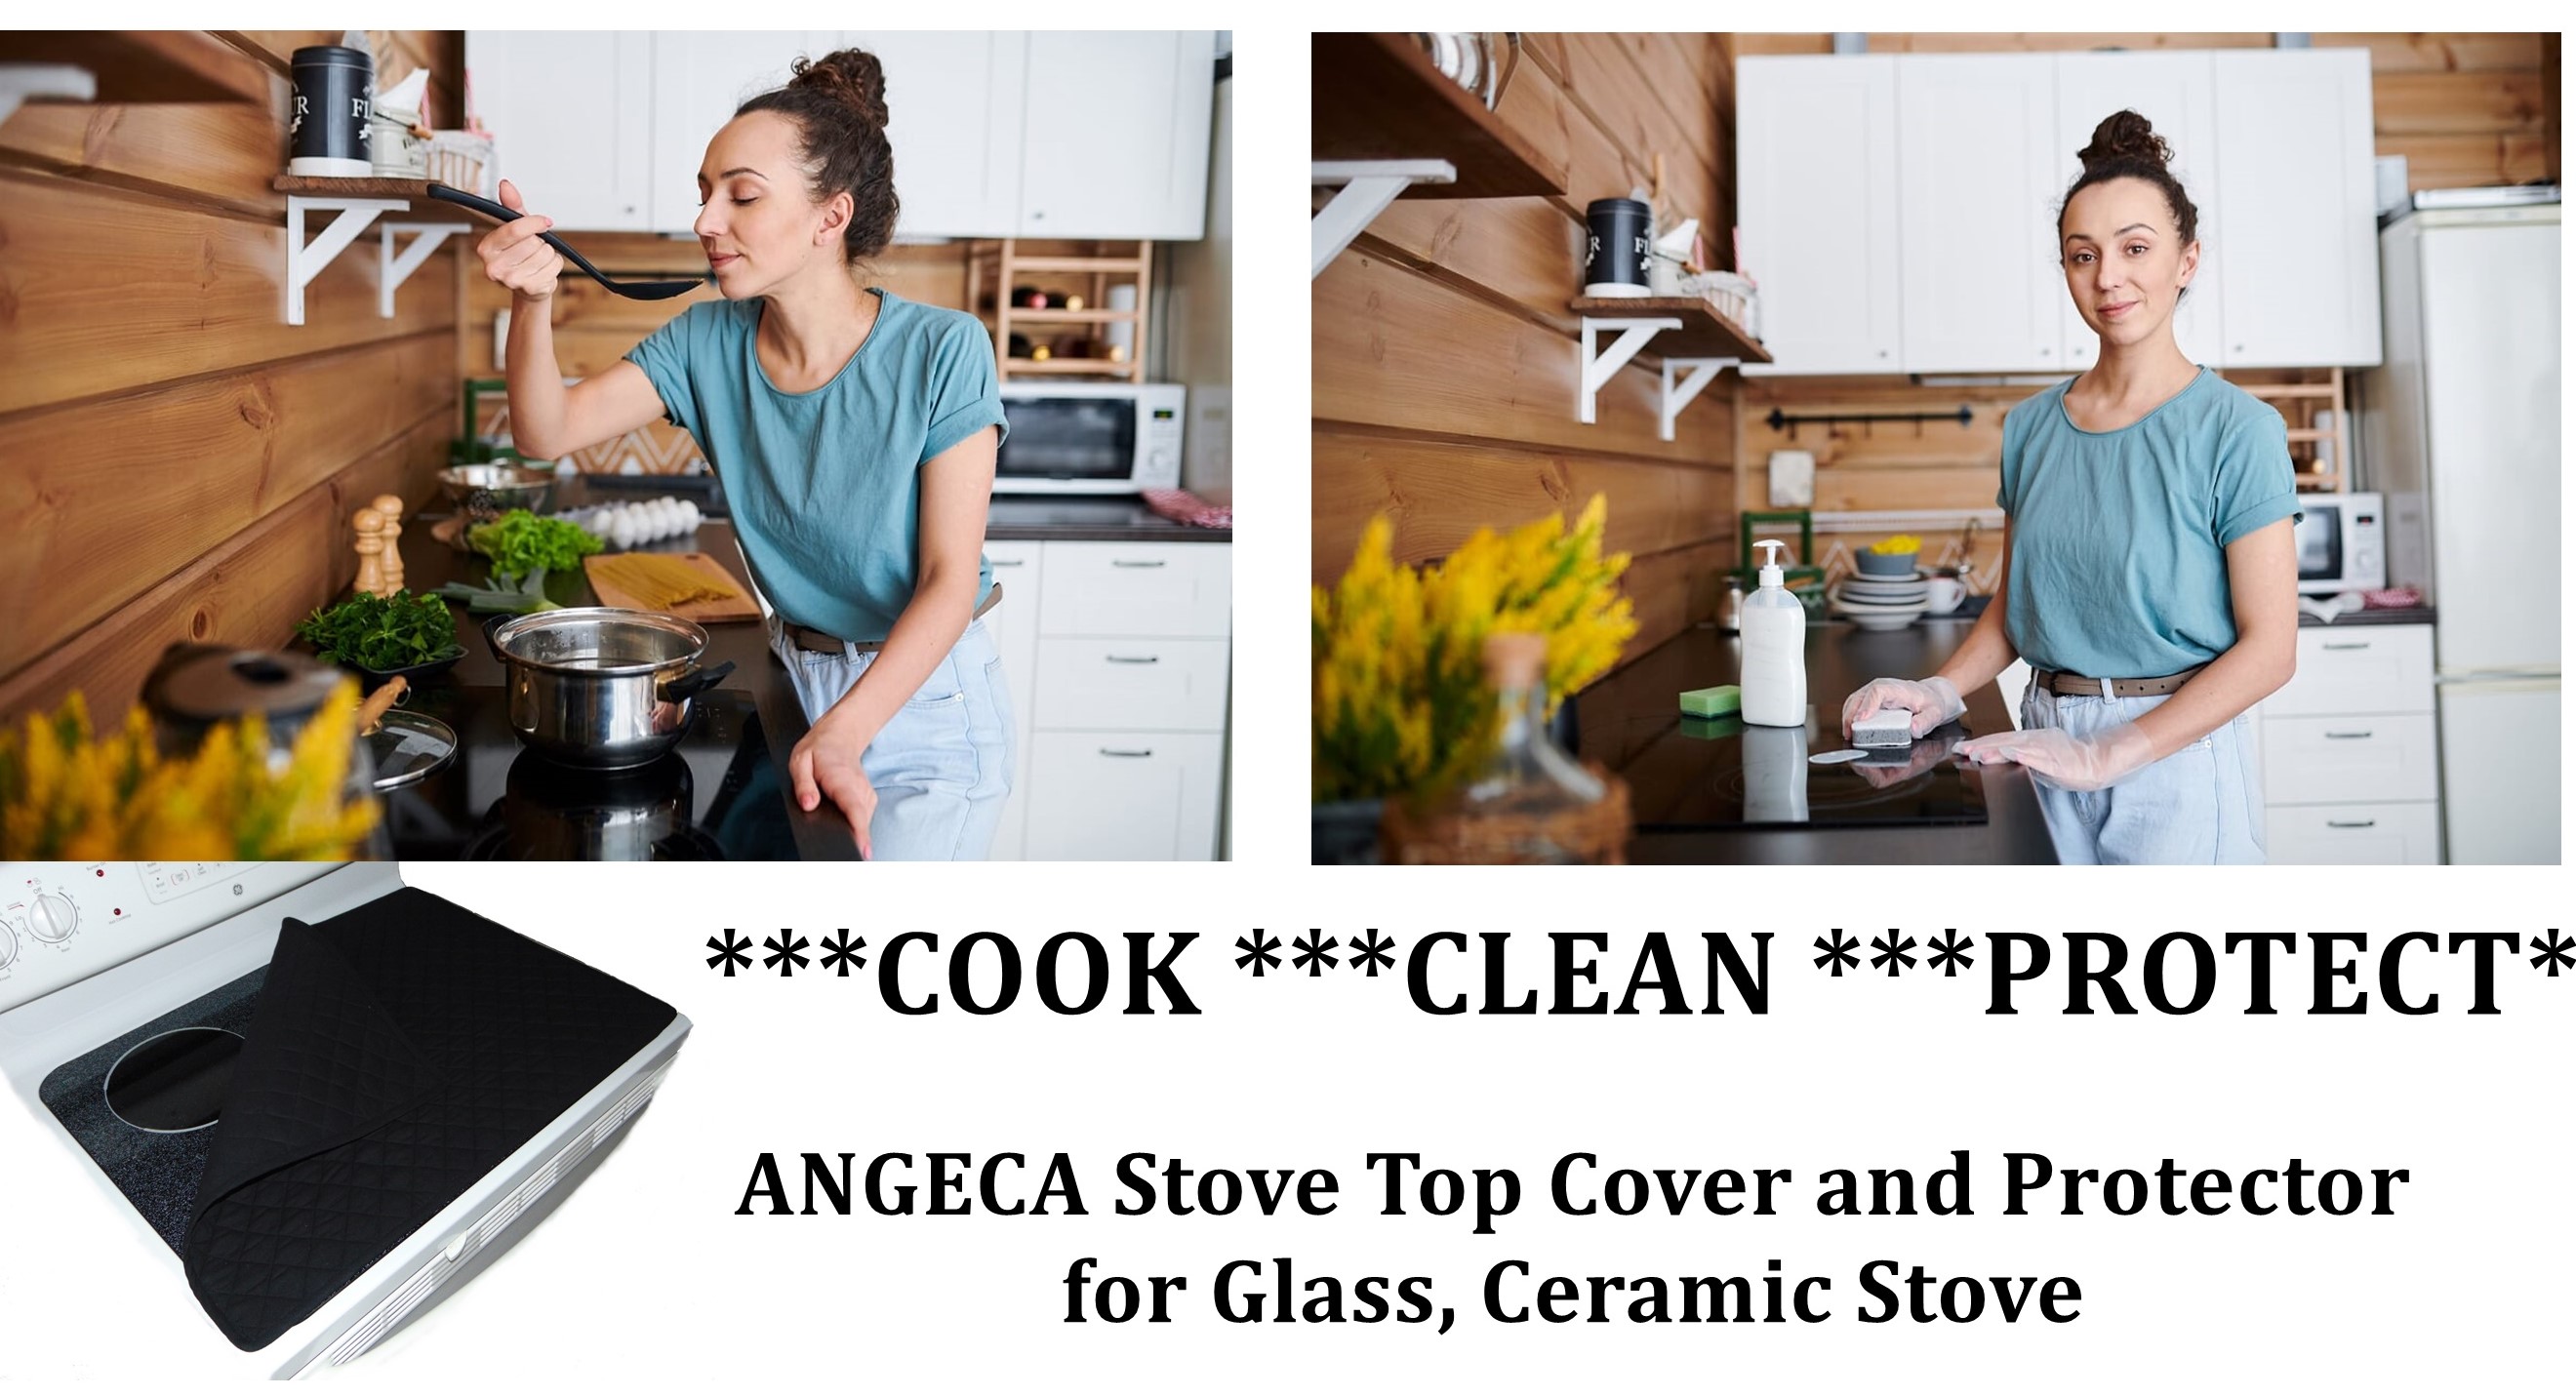 Angeca Stove Top Cover and Protector for Glass, Ceramic Stove - Quilted Material 100% Cotton - Protects Electric Stove - Glass Cooktop - Washer